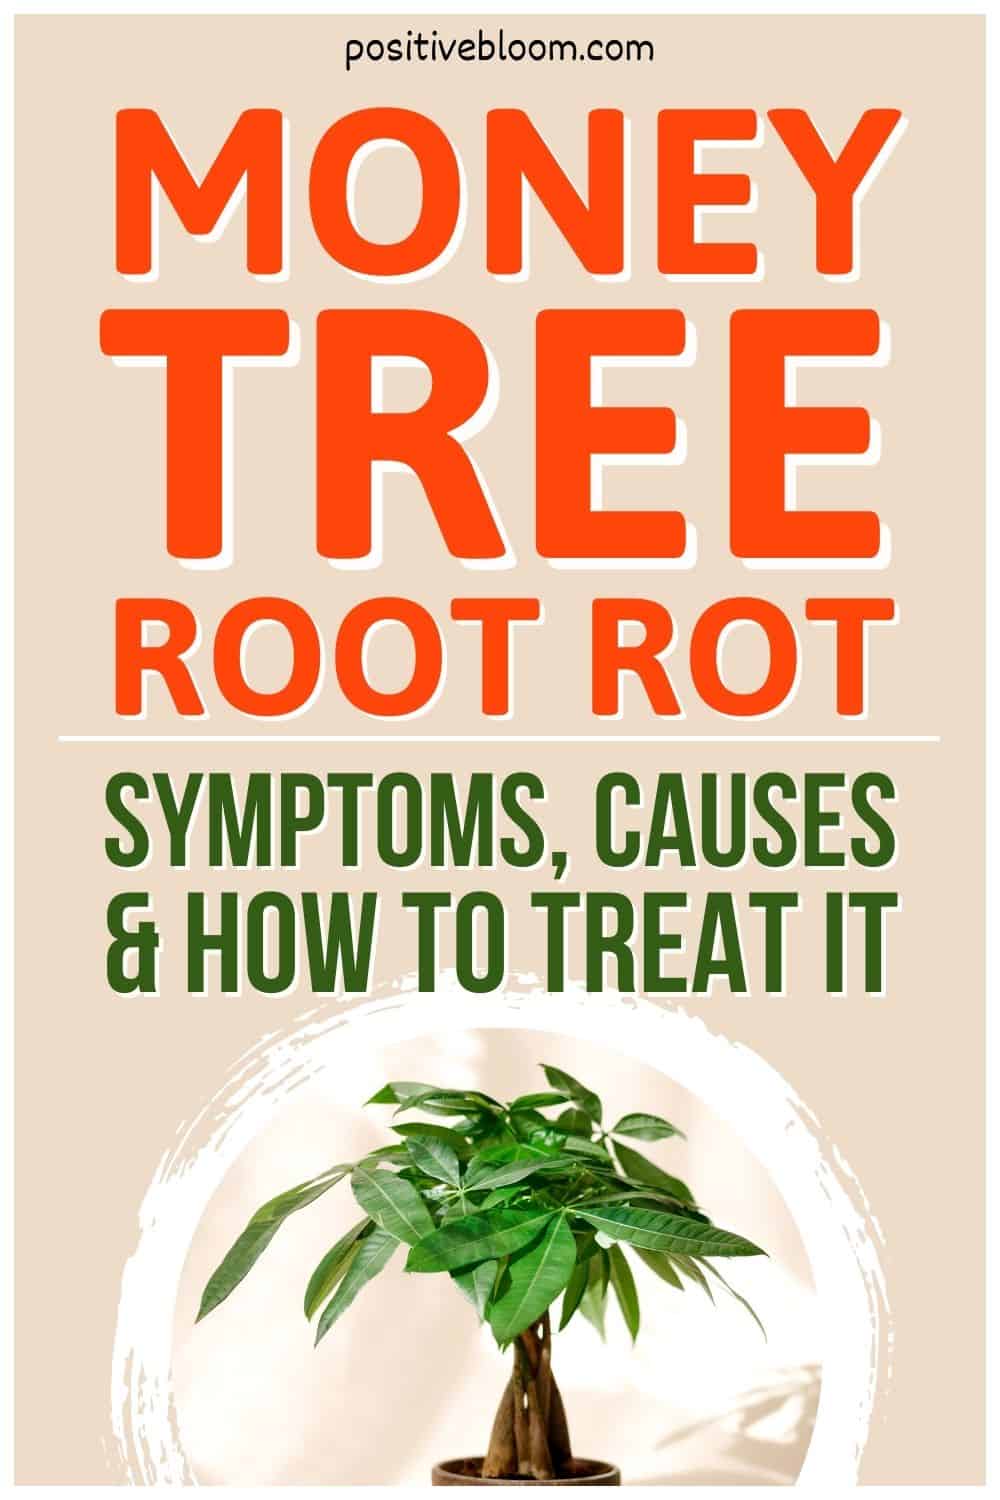 Money Tree Root Rot – Symptoms, Causes & How To Treat It